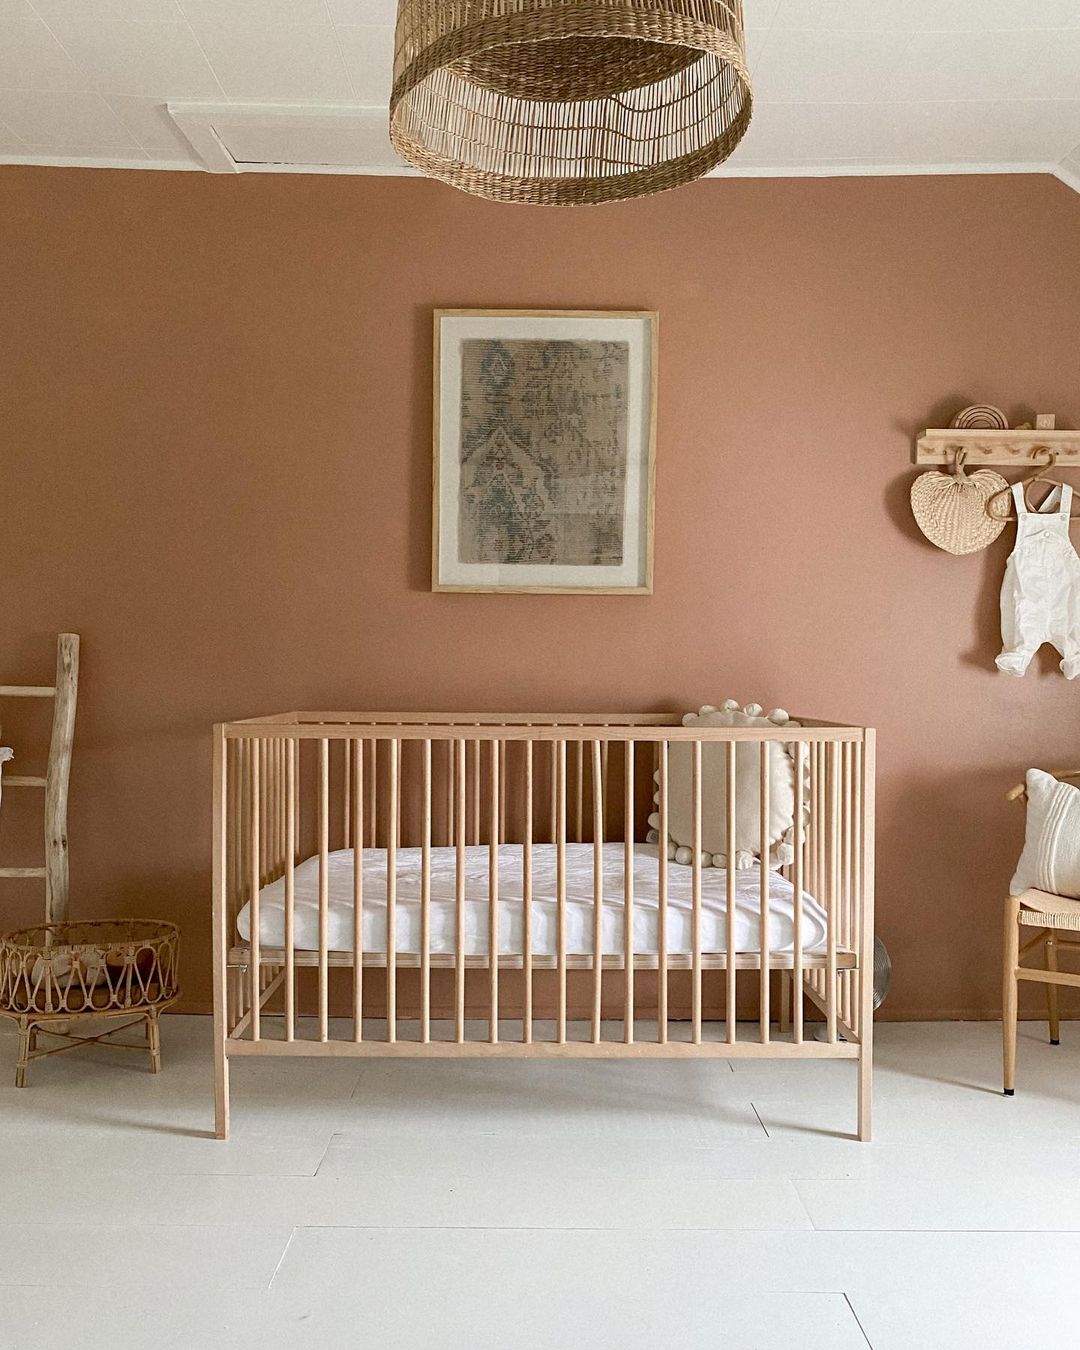 Terra Cotta Nursery with Light Wooden Crib and Wall Art. Photo by Instagram user @jennaborst